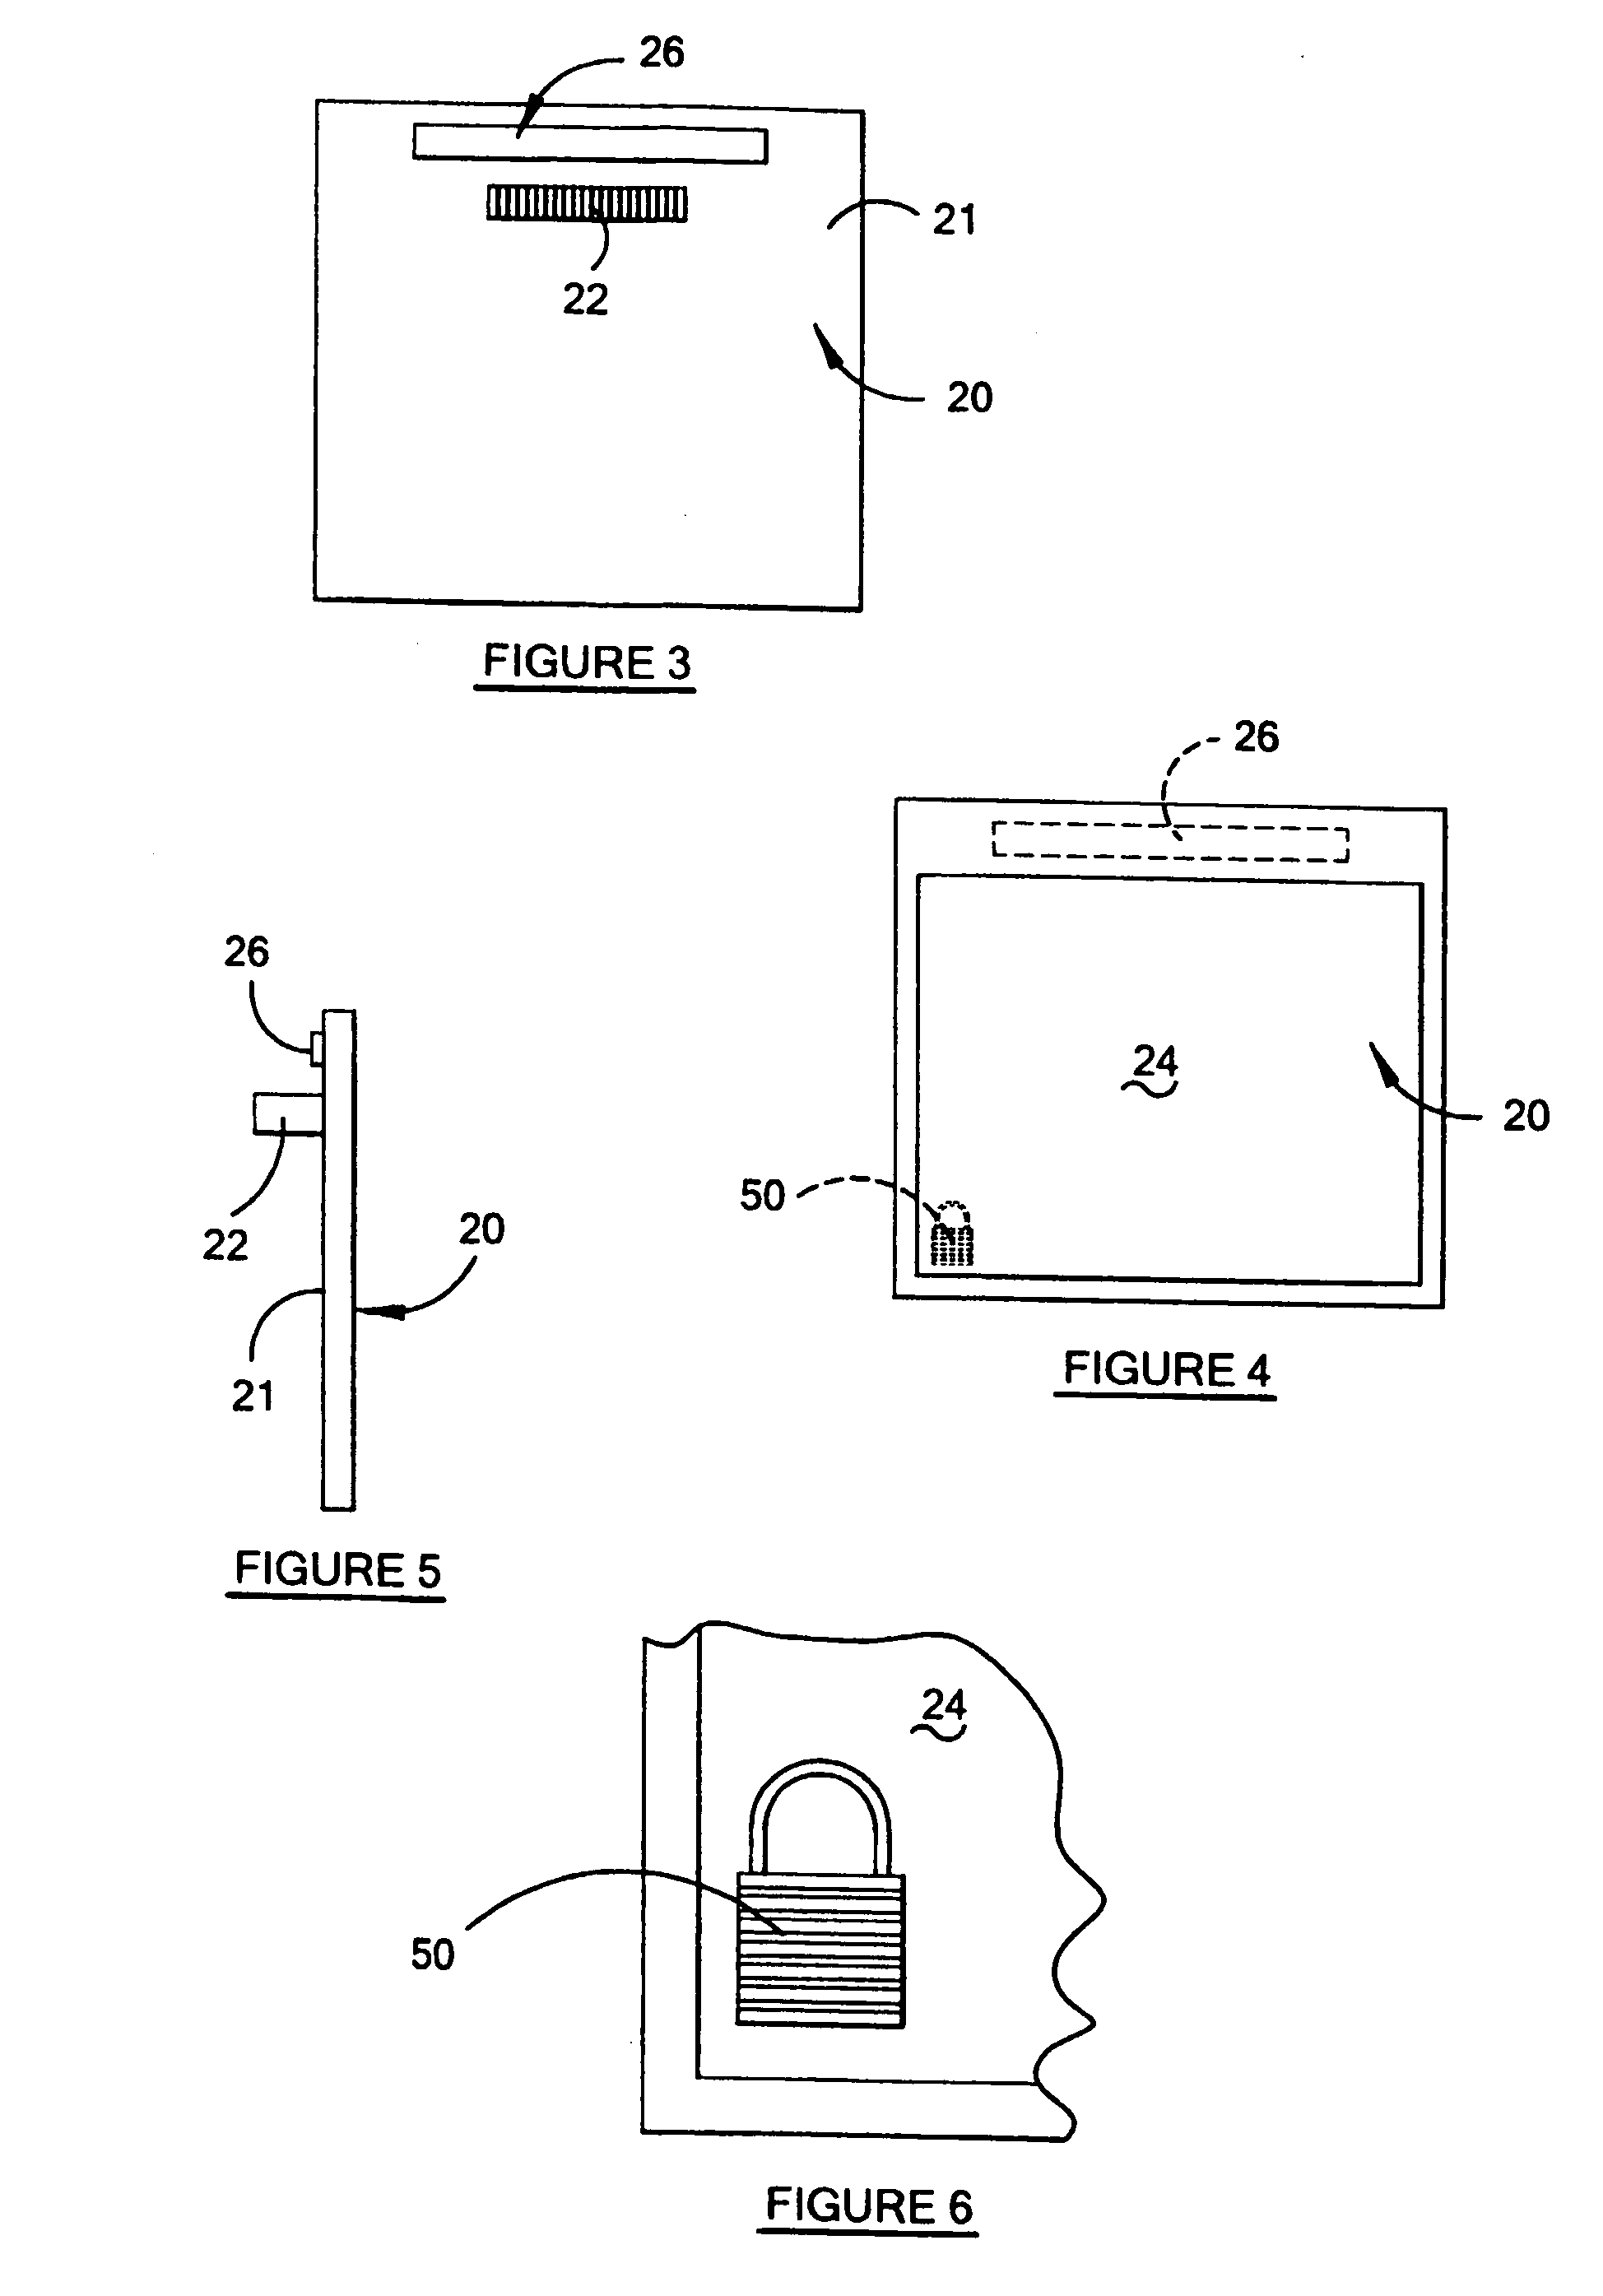 Display device and funds transaction device including the display device